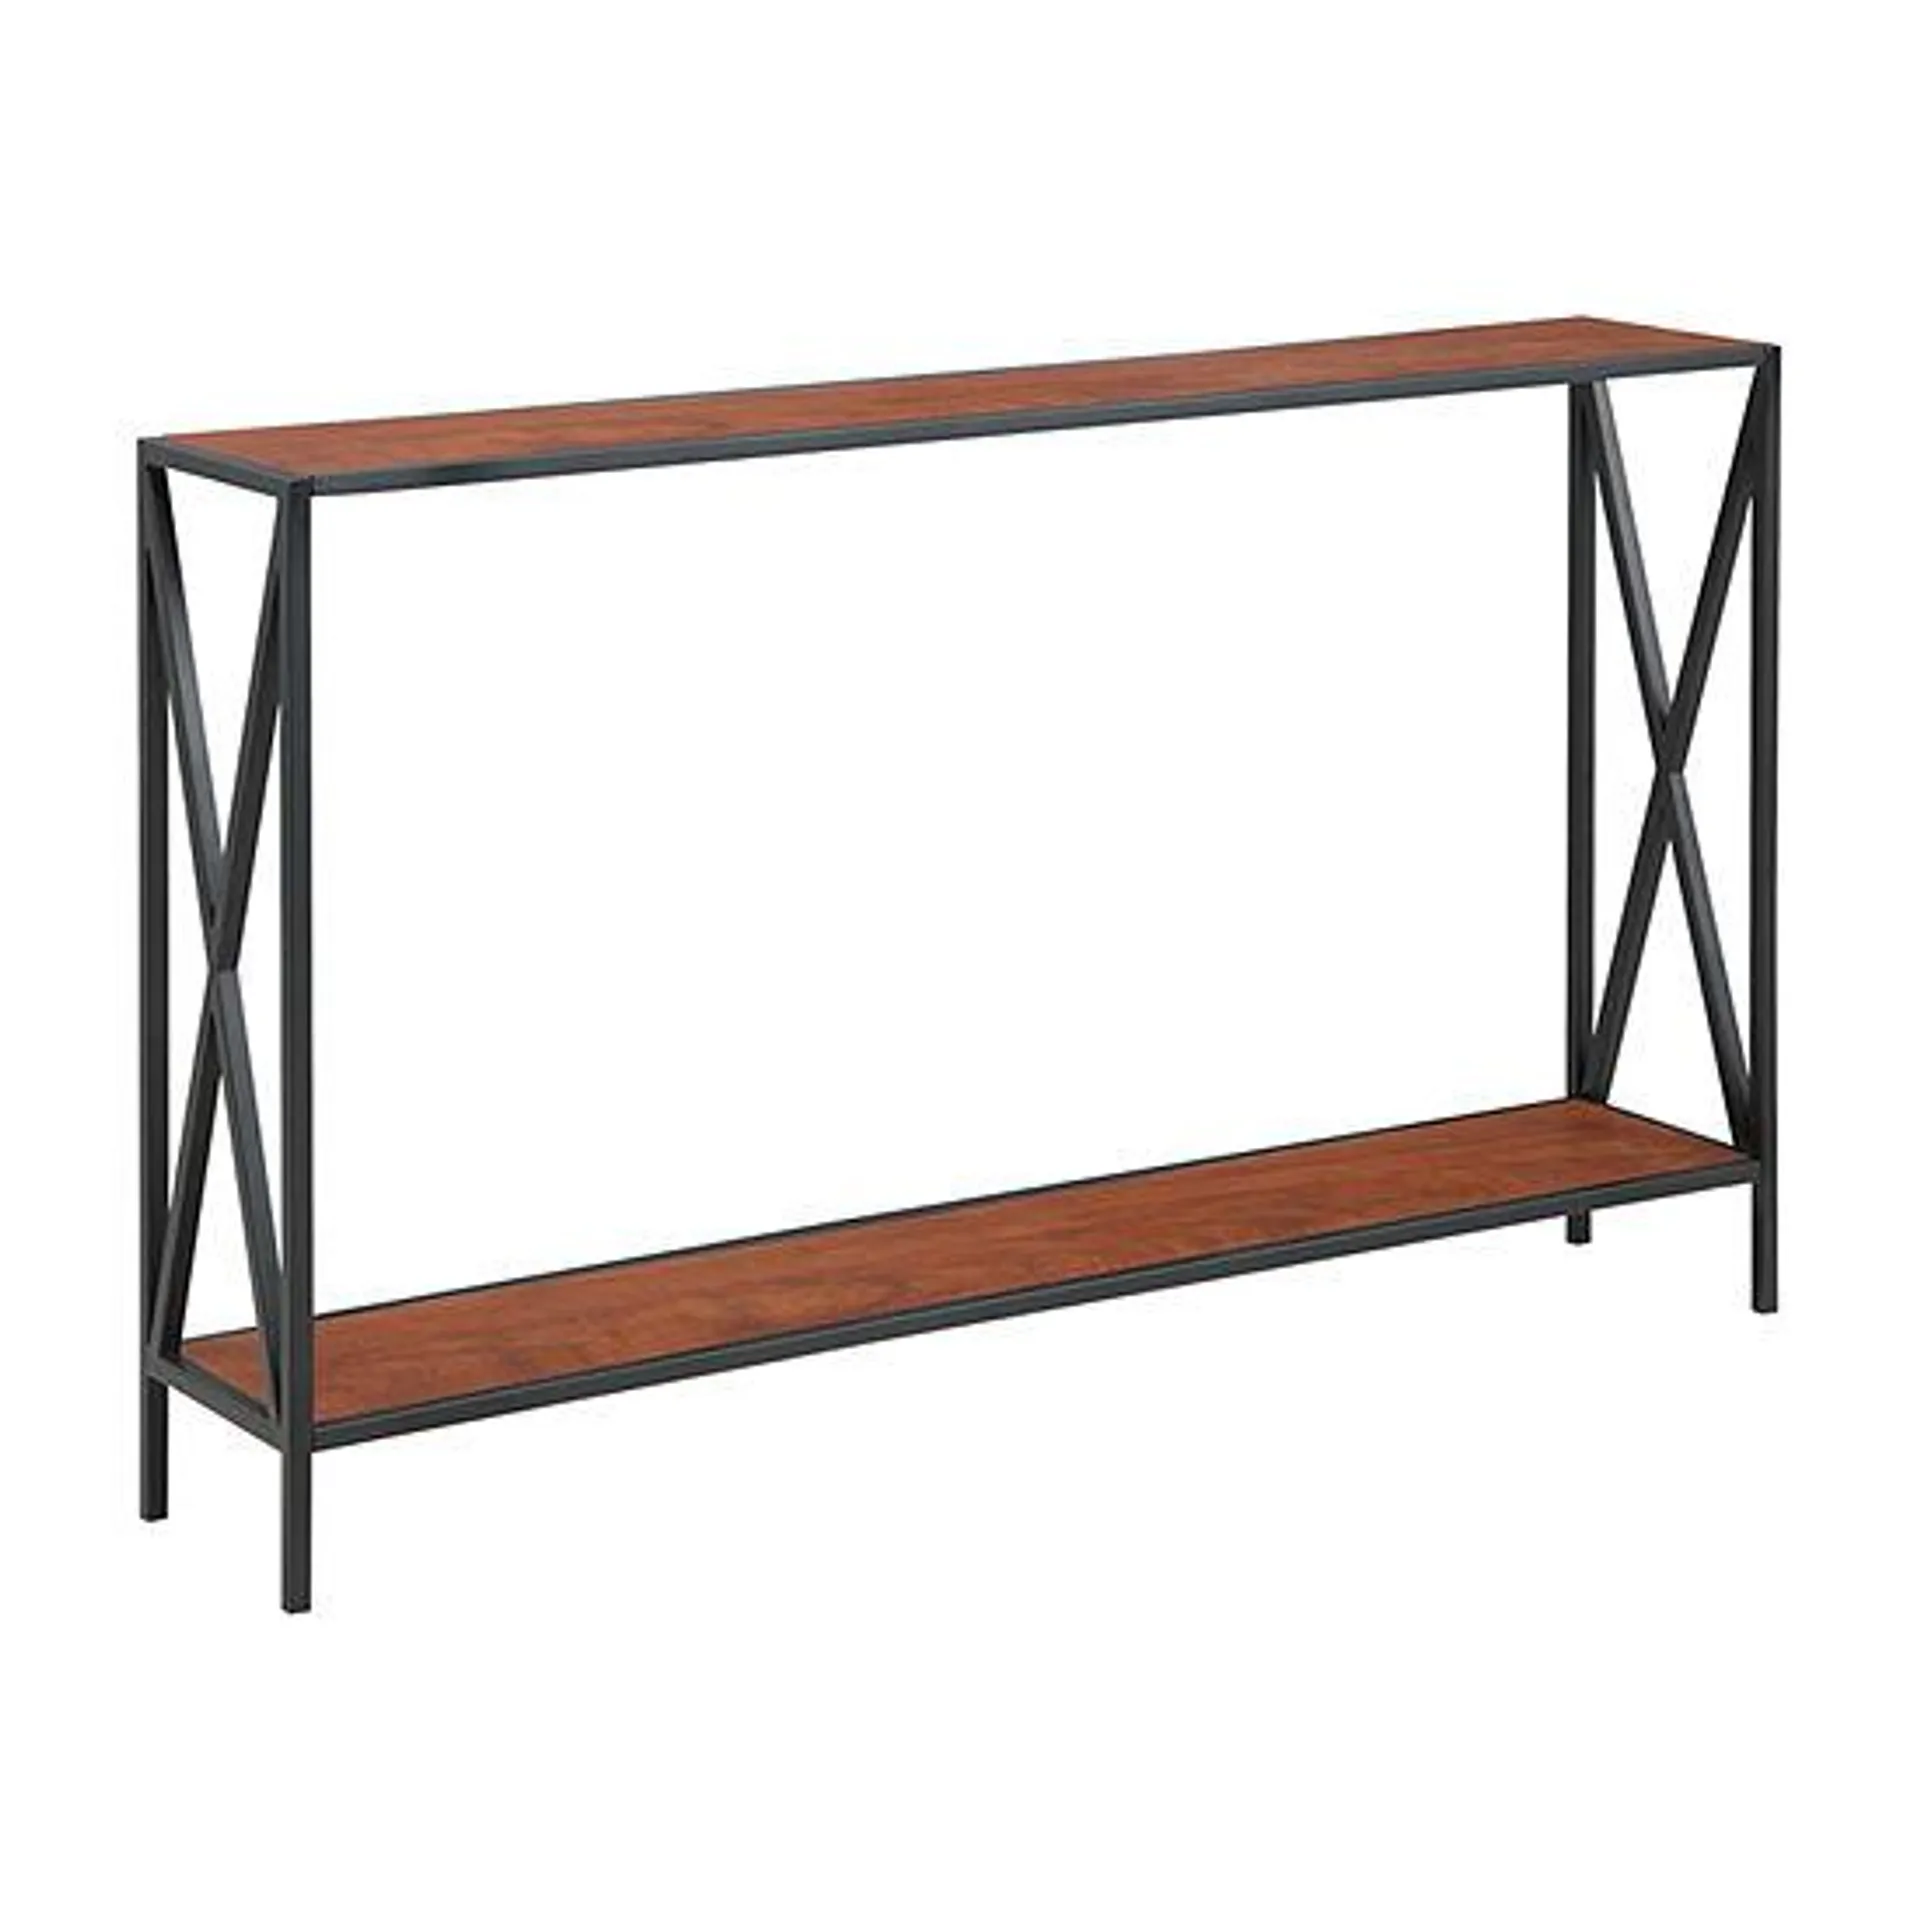 Tucson Console Table